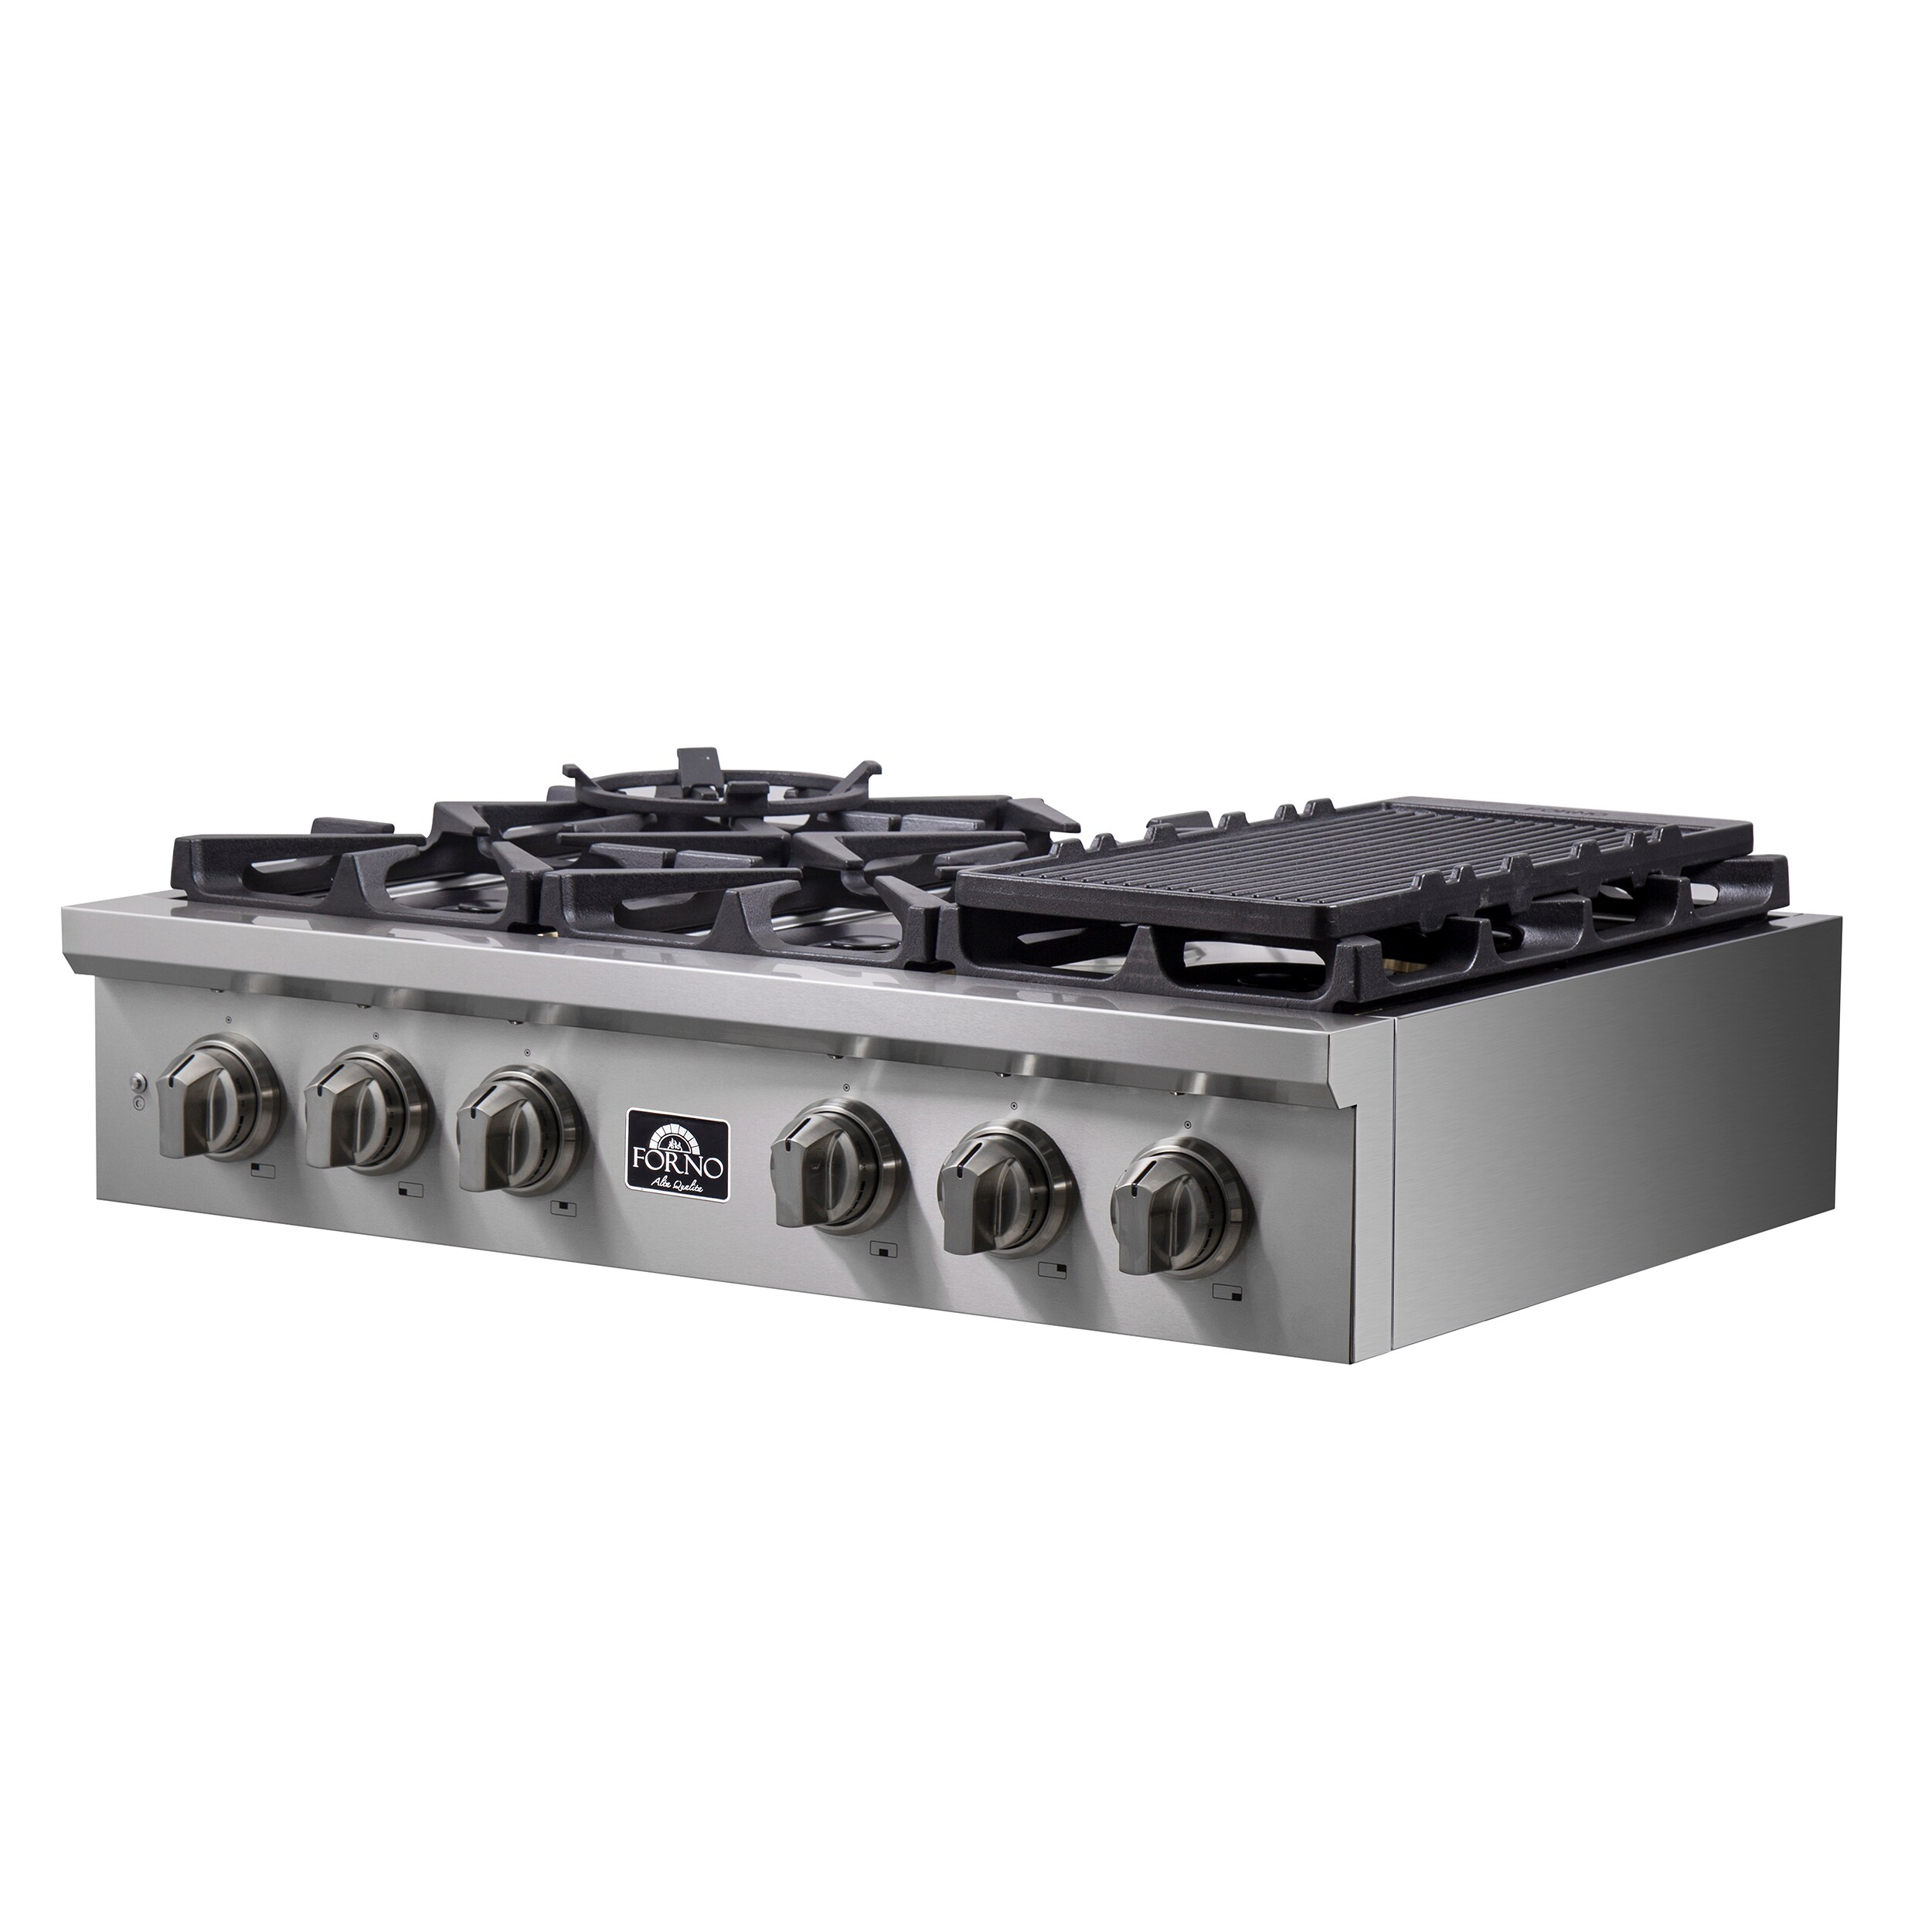 COSTWAY 36-inch Gas Cooktop, Stainless Steel Gas Stove Top with 6 Burners,  ABS Knobs and Cast Iron Grates, NG/LP Convertible Gas Range Top with Sealed